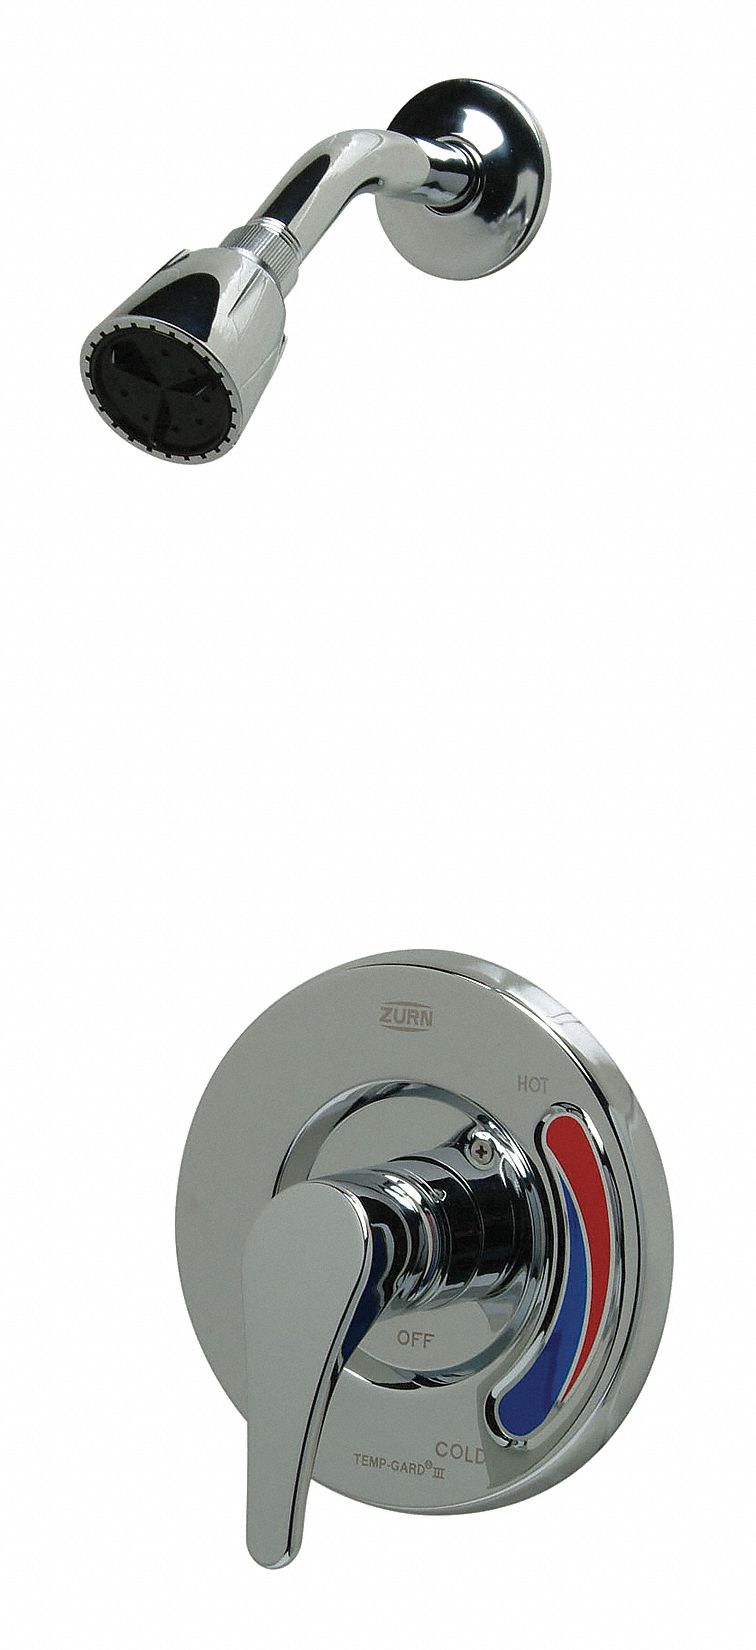 Zurn Metal Wall Mounted Shower Head Kit, 2.5 gpm, 1/2 in FNPT Connection Type - Z7301-SS-MT